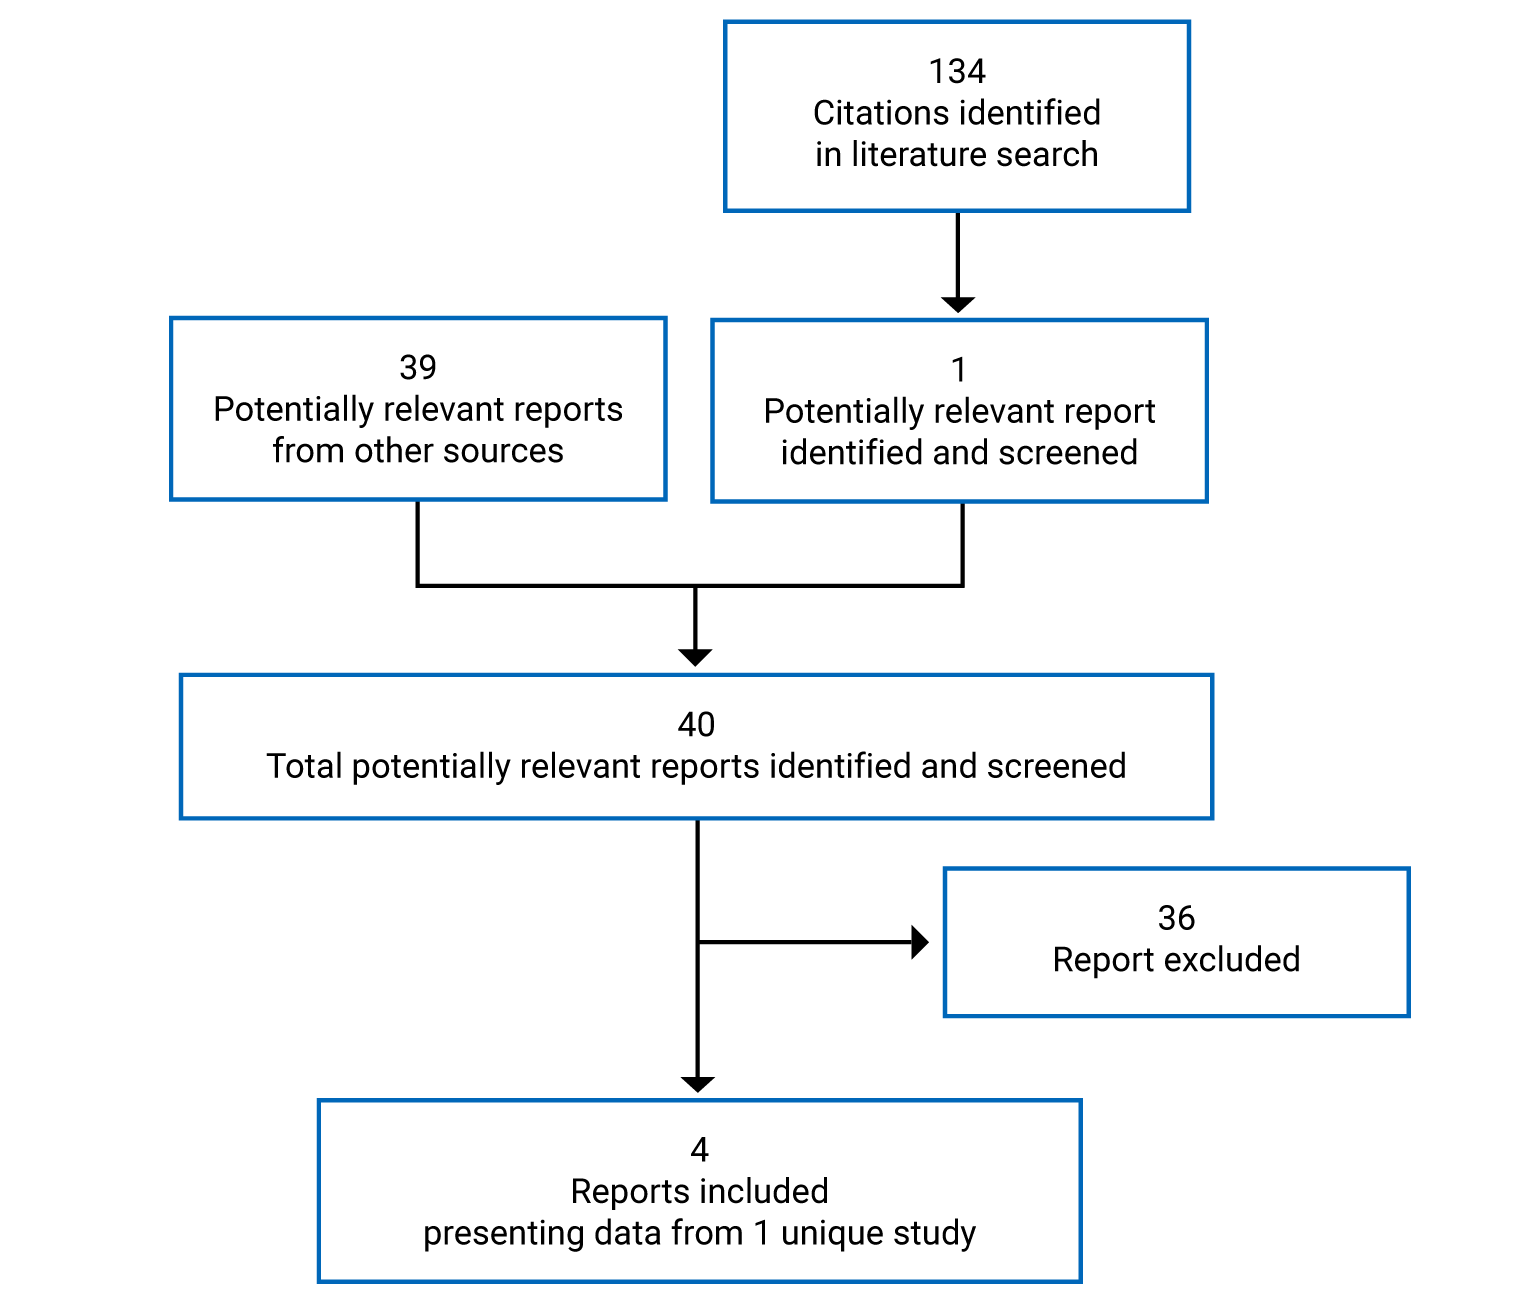 40 citations were identified and 36 were excluded, while 39 electronic literature and grey literature potentially relevant full text reports were retrieved for scrutiny. In total 4 reports are included in the review.